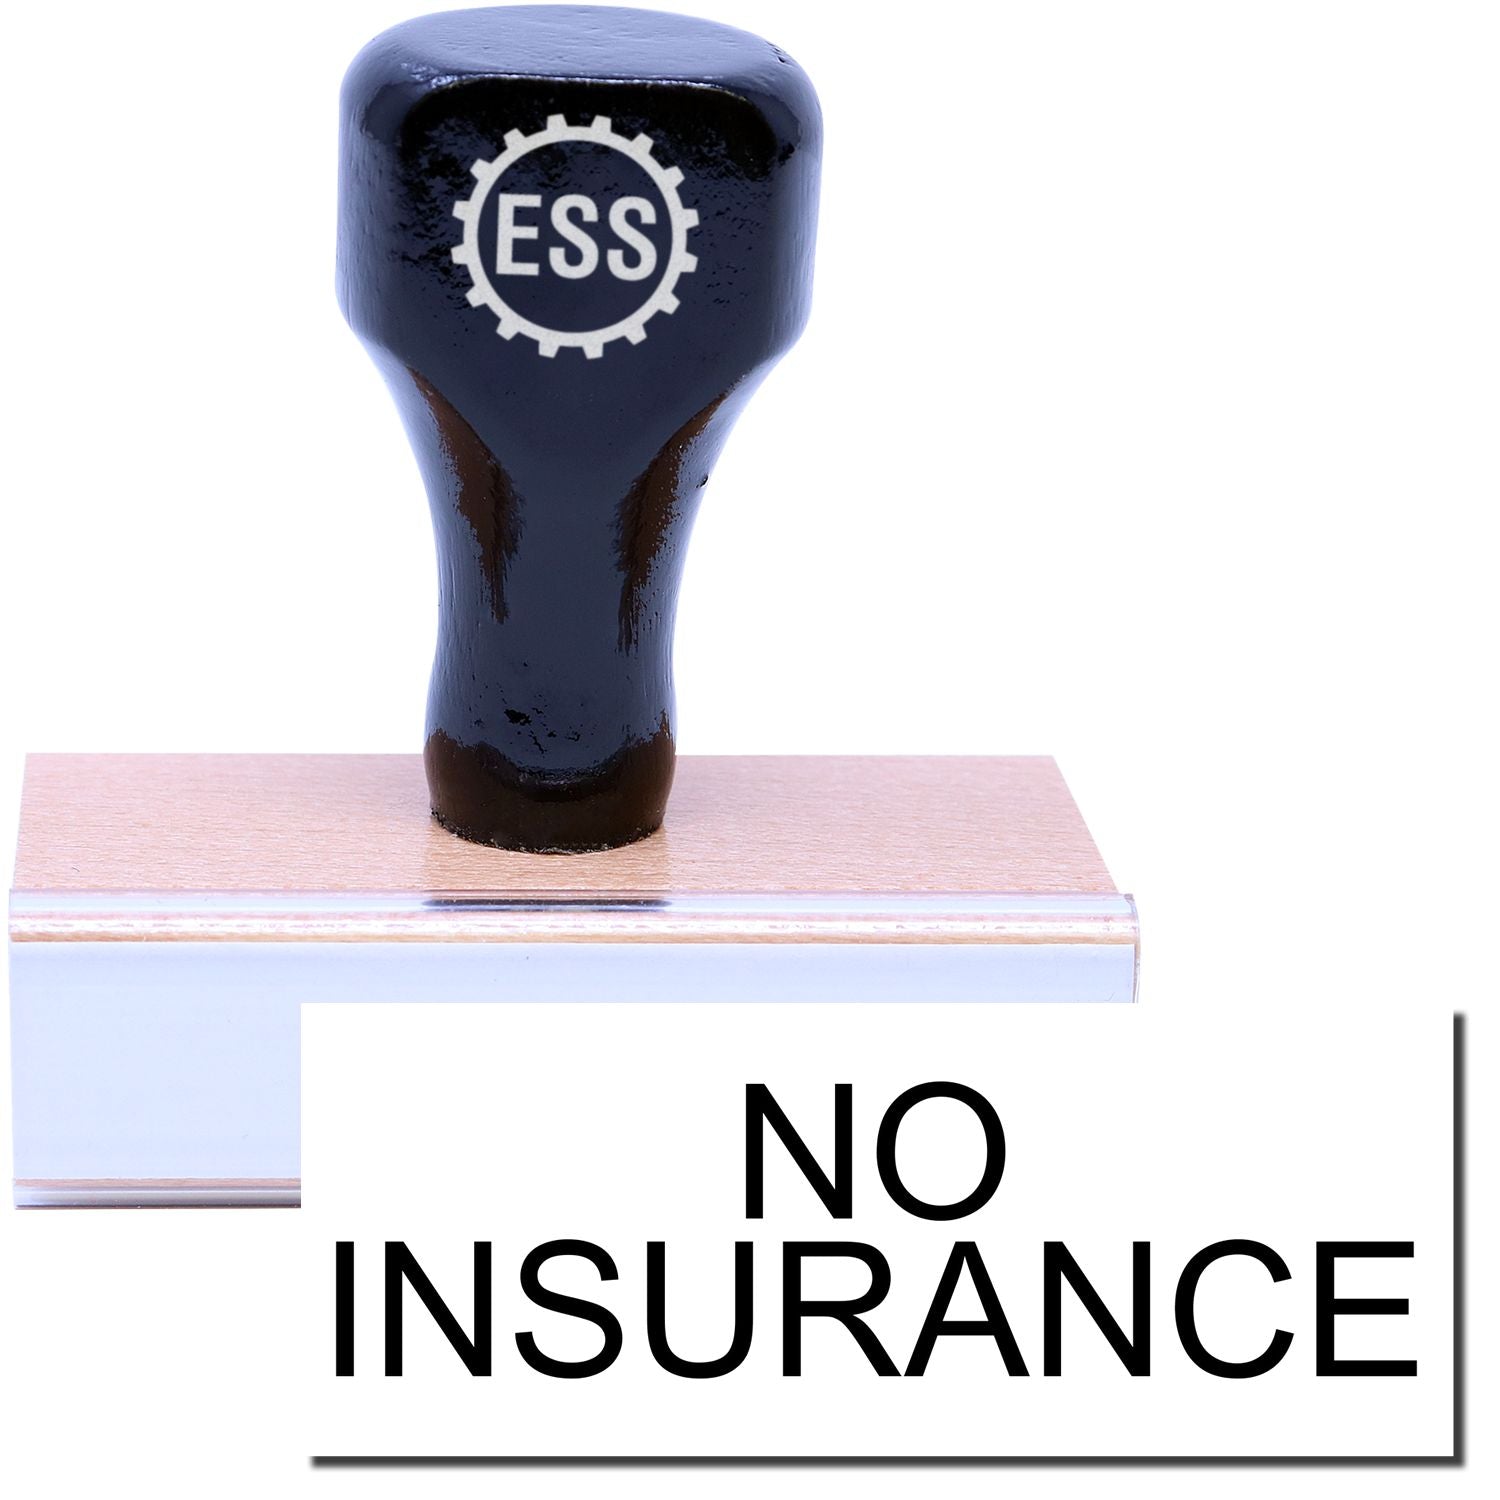 A stock office rubber stamp with a stamped image showing how the text "NO INSURANCE" is displayed after stamping.